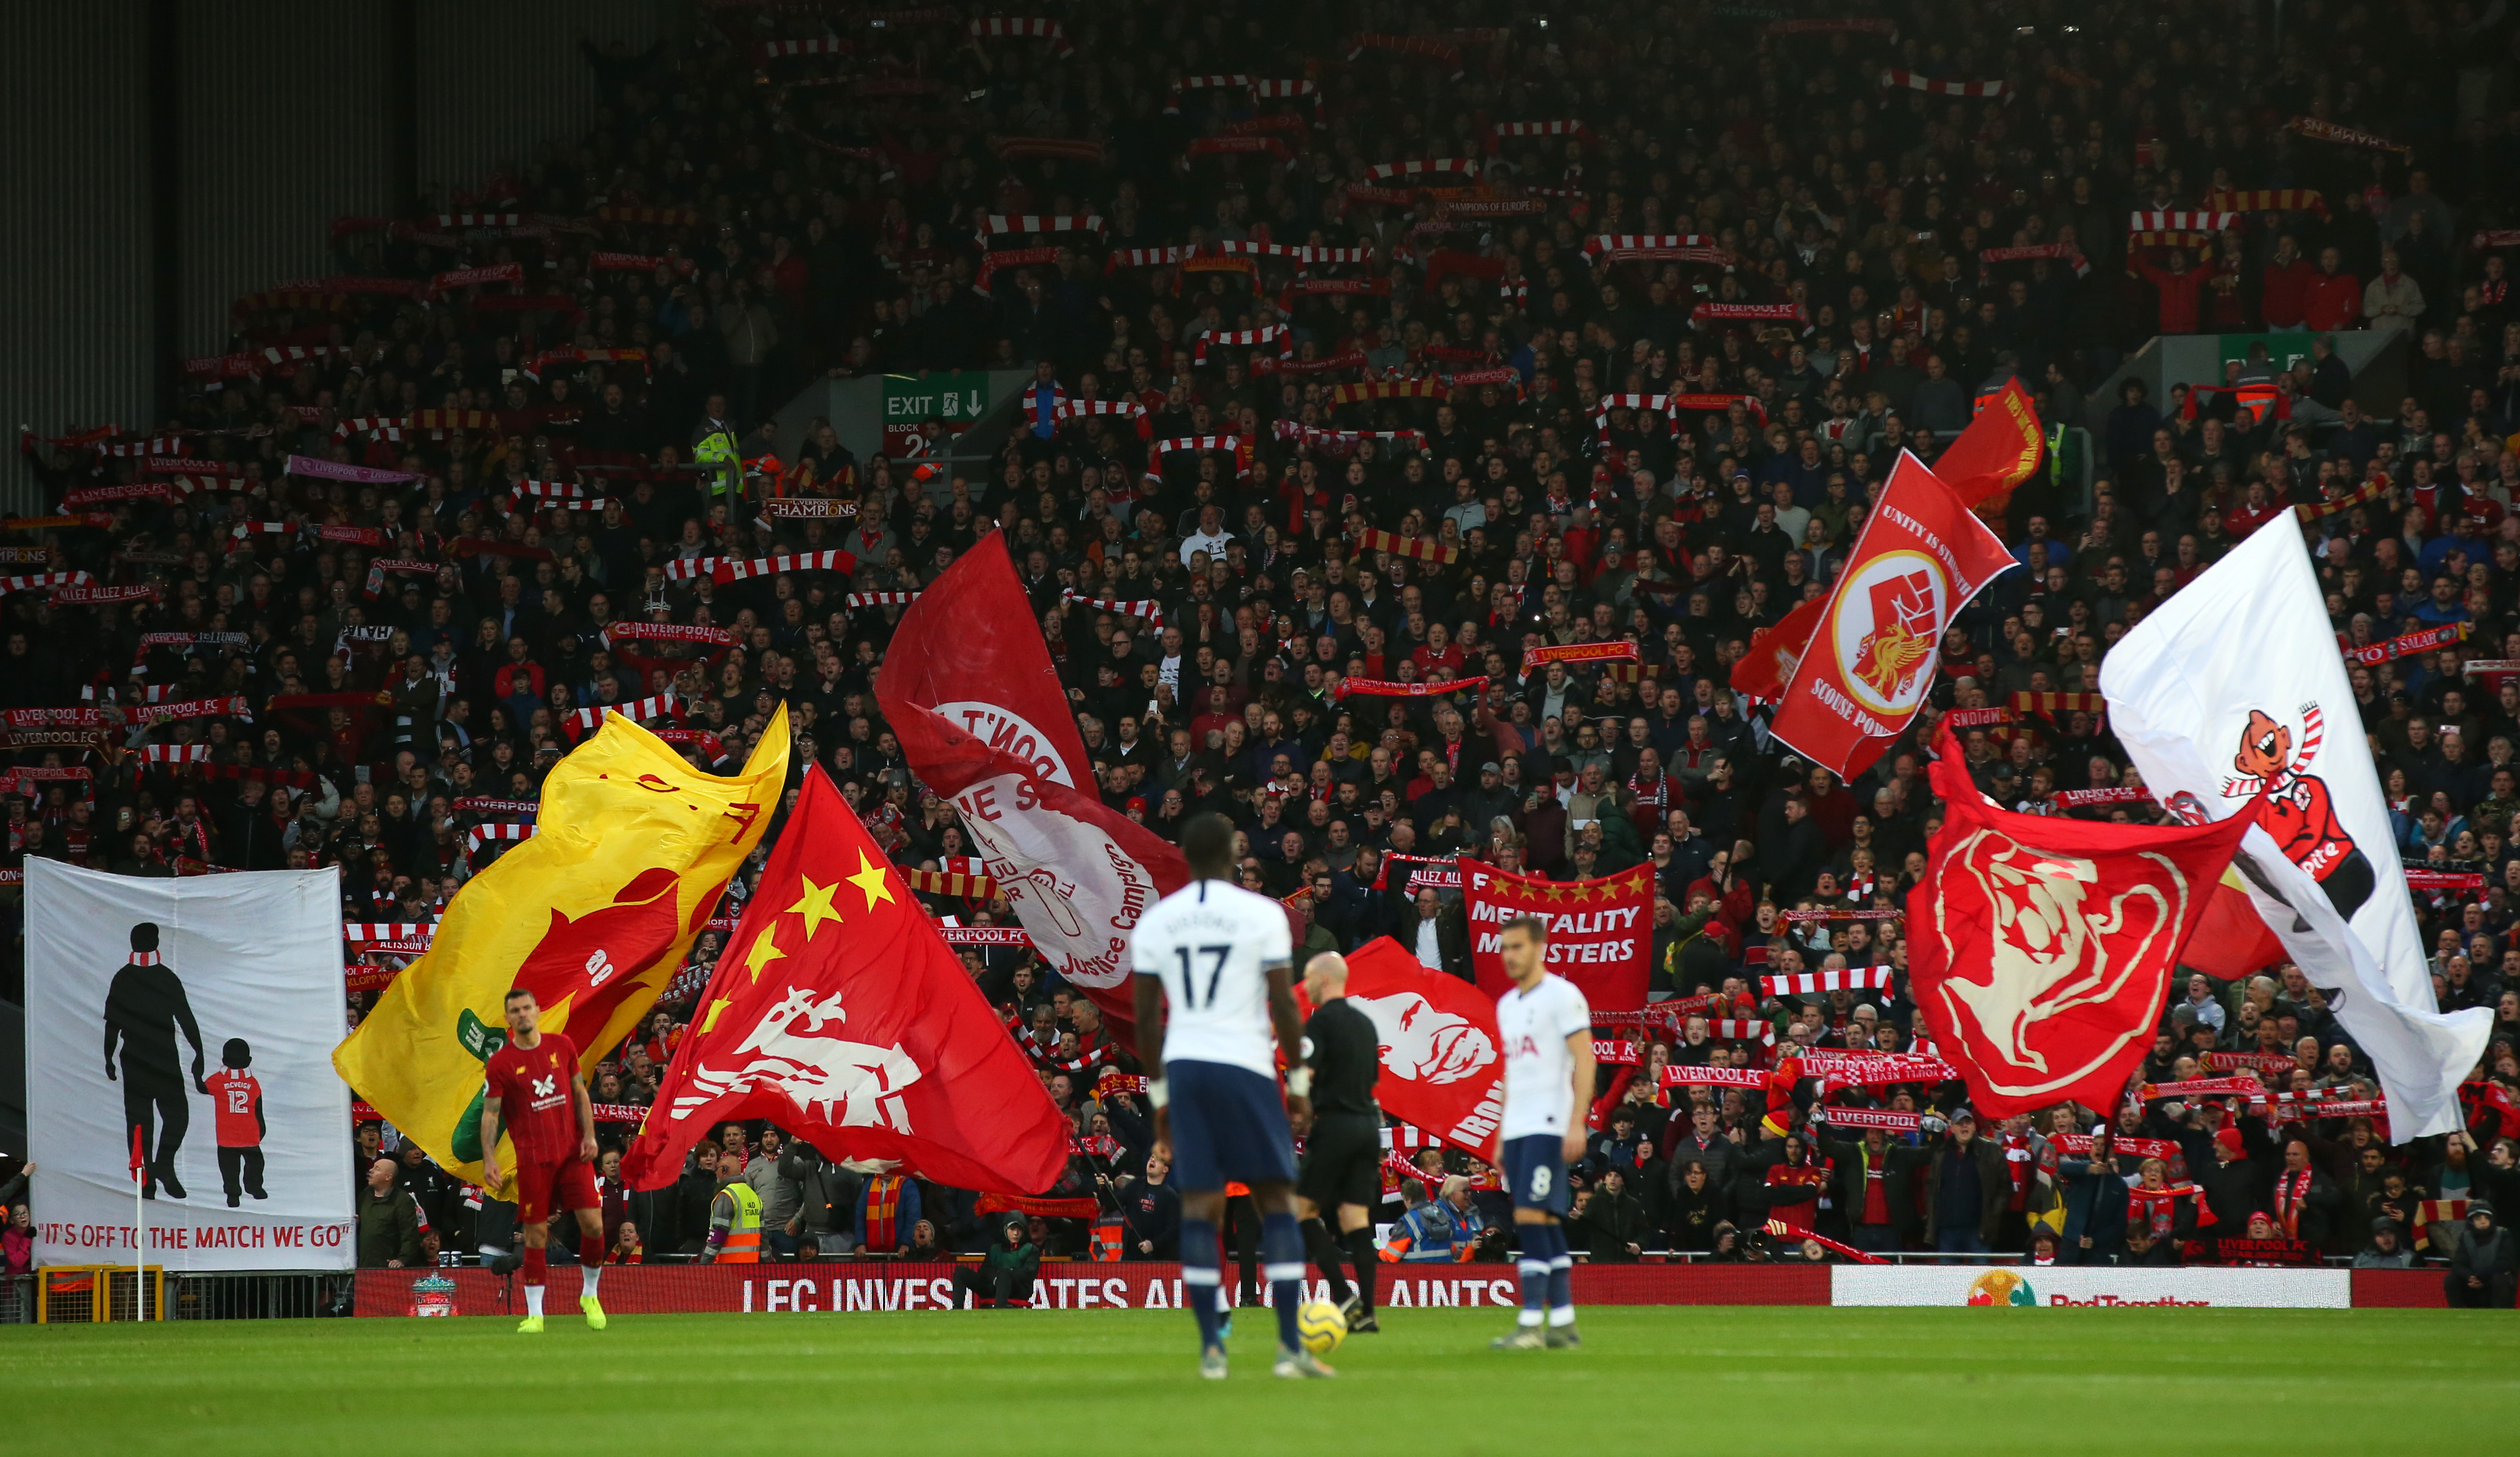 LIVERPOOL, ENGLAND - OCTOBER 27:  Liverpool fans show their support prior to the Premier League match between Liverpool FC and Tottenham Hotspur at Anfield on October 27, 2019 in Liverpool, United Kingdom. (Photo by Alex Livesey/Getty Images)